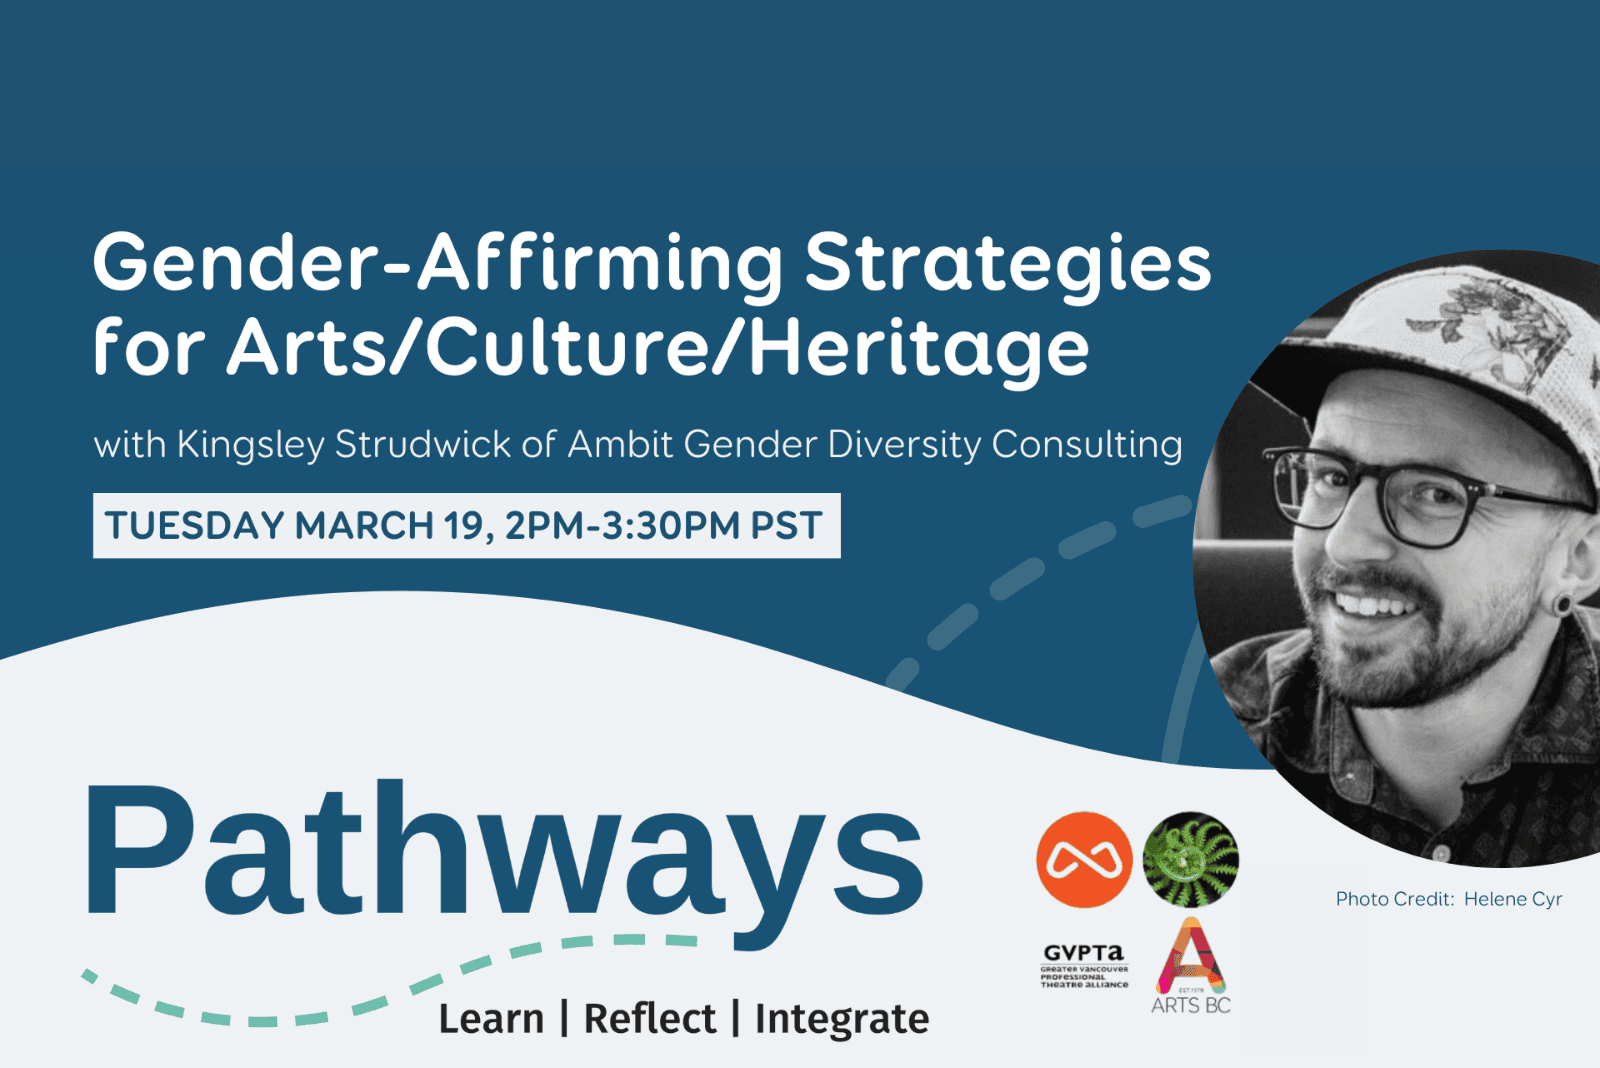 Workshop on Gender-Affirming Strategies for Arts/Culture/Heritage with Kingsley Strudwick of Ambit Gender Diversity Consulting, Tuesday March 19, 2-3:30pm